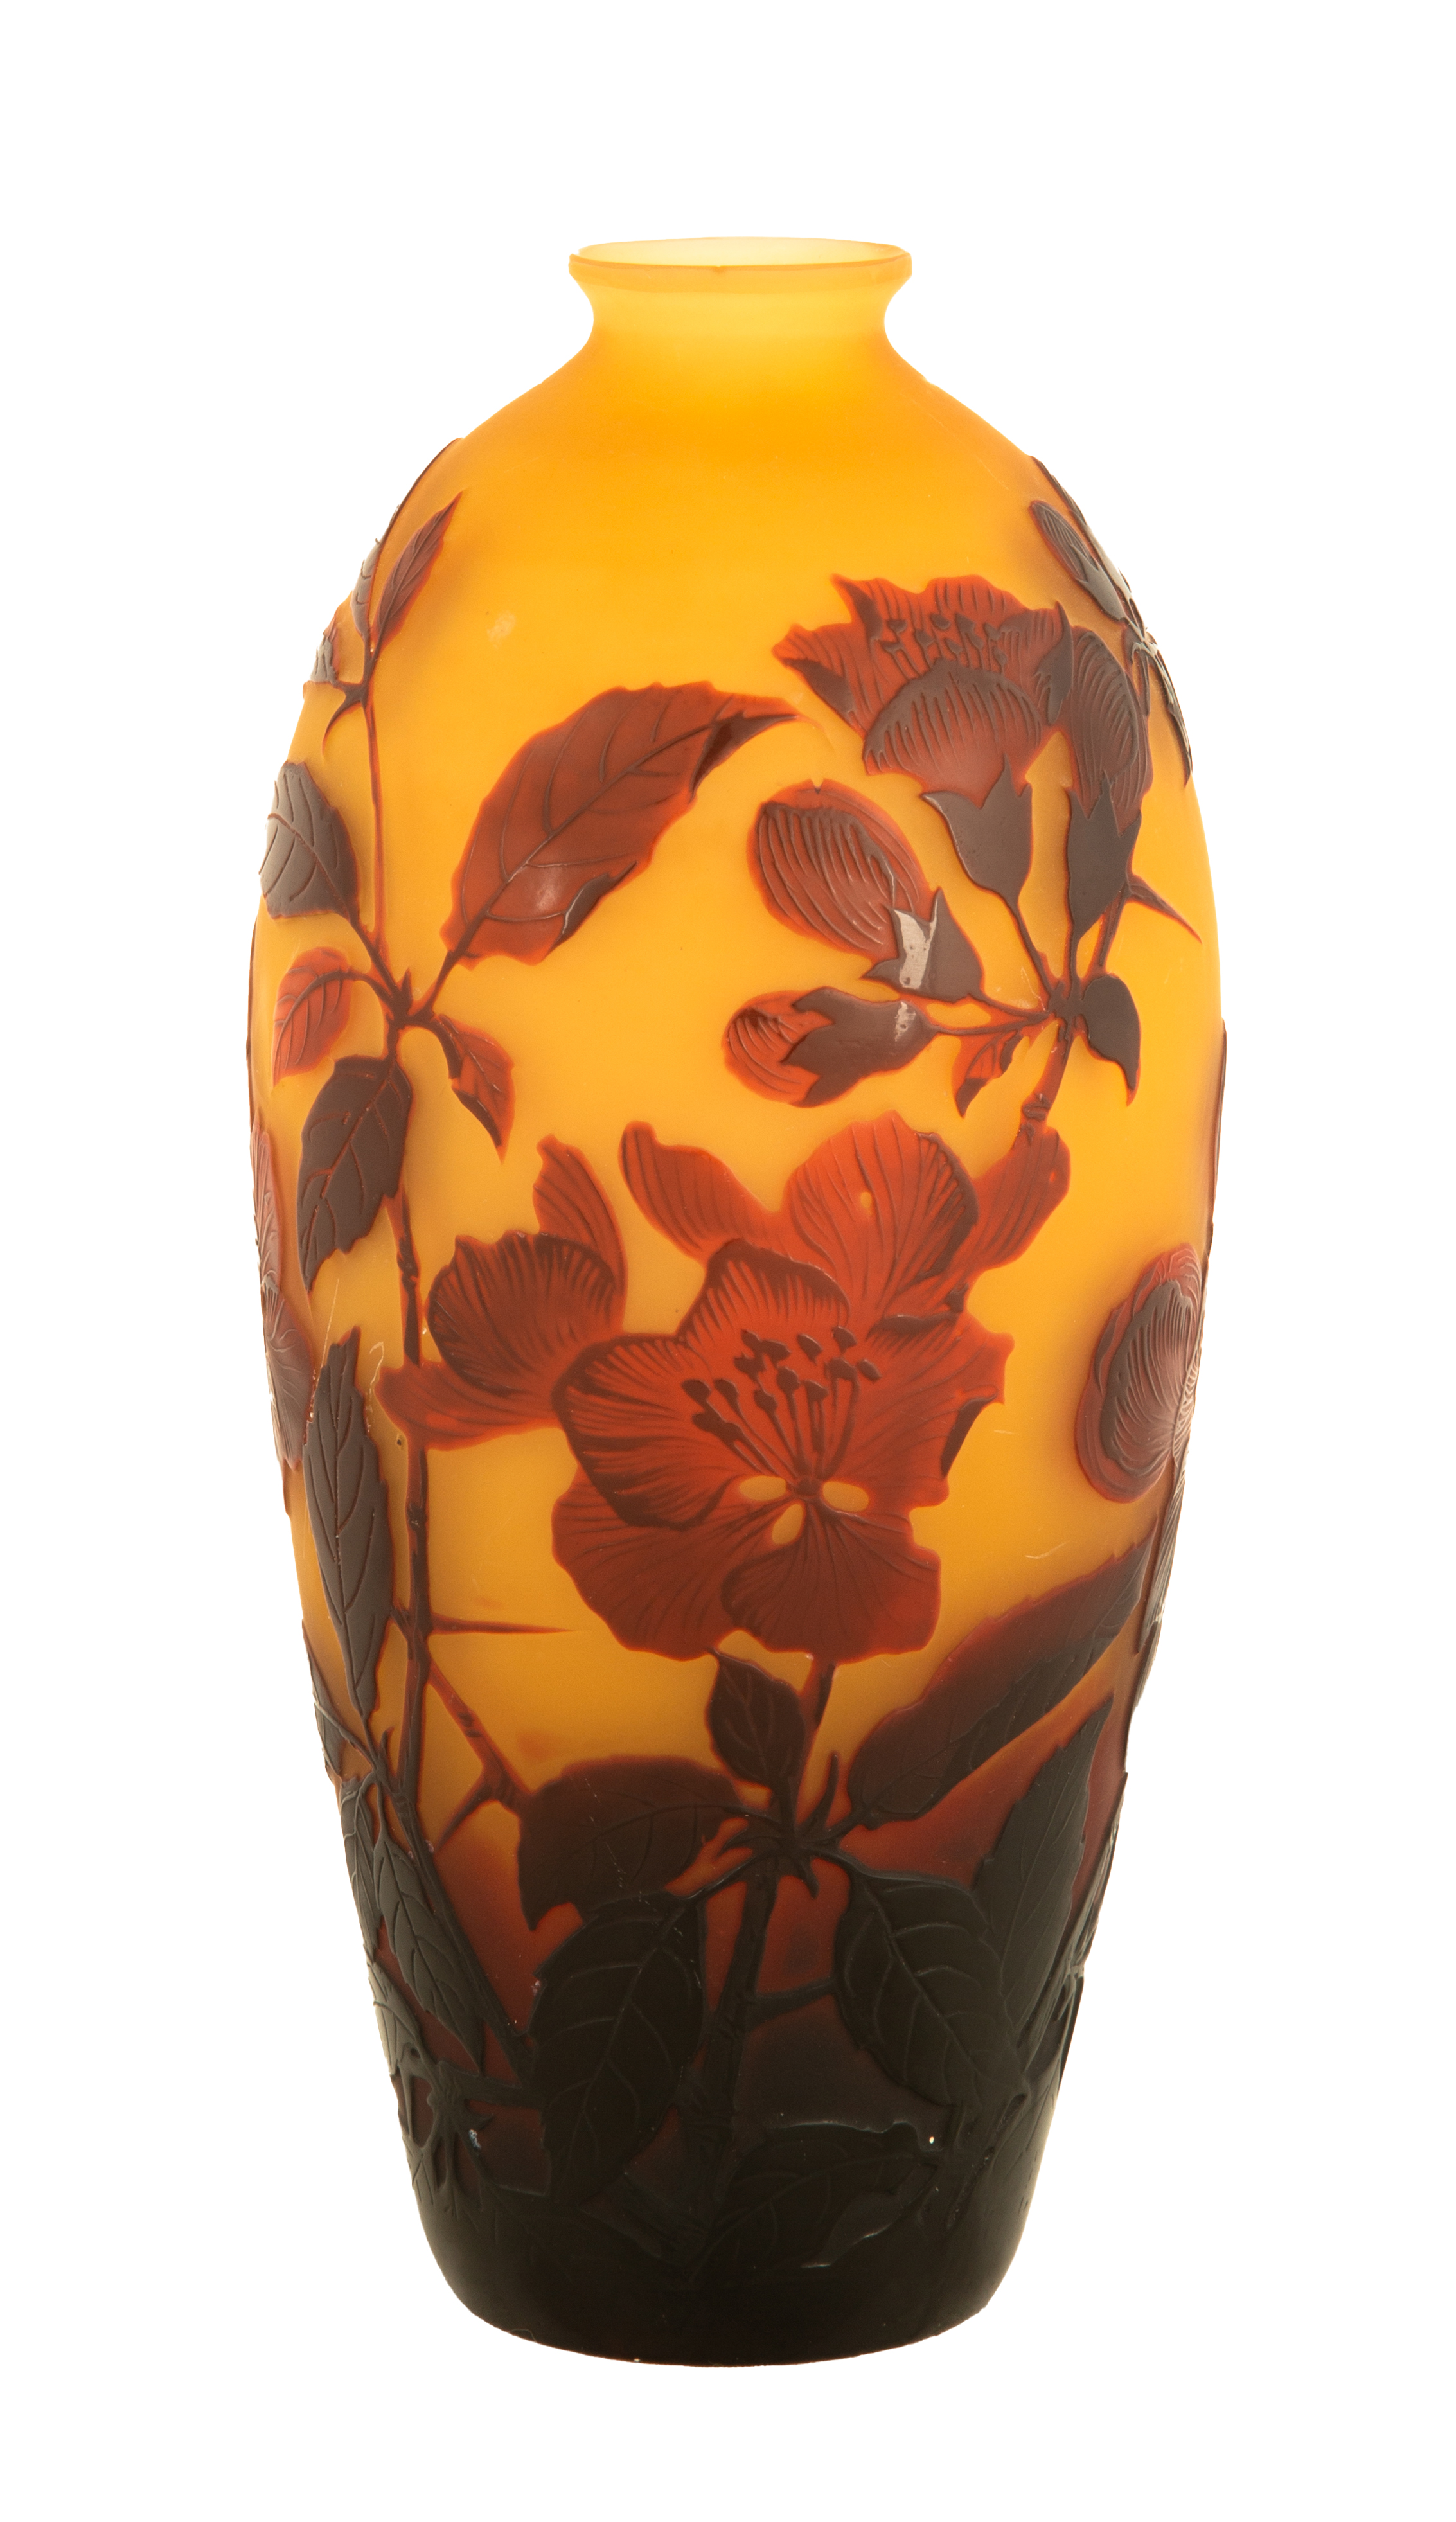 DARGENTAL FRENCH CAMEO VASE Early 20th